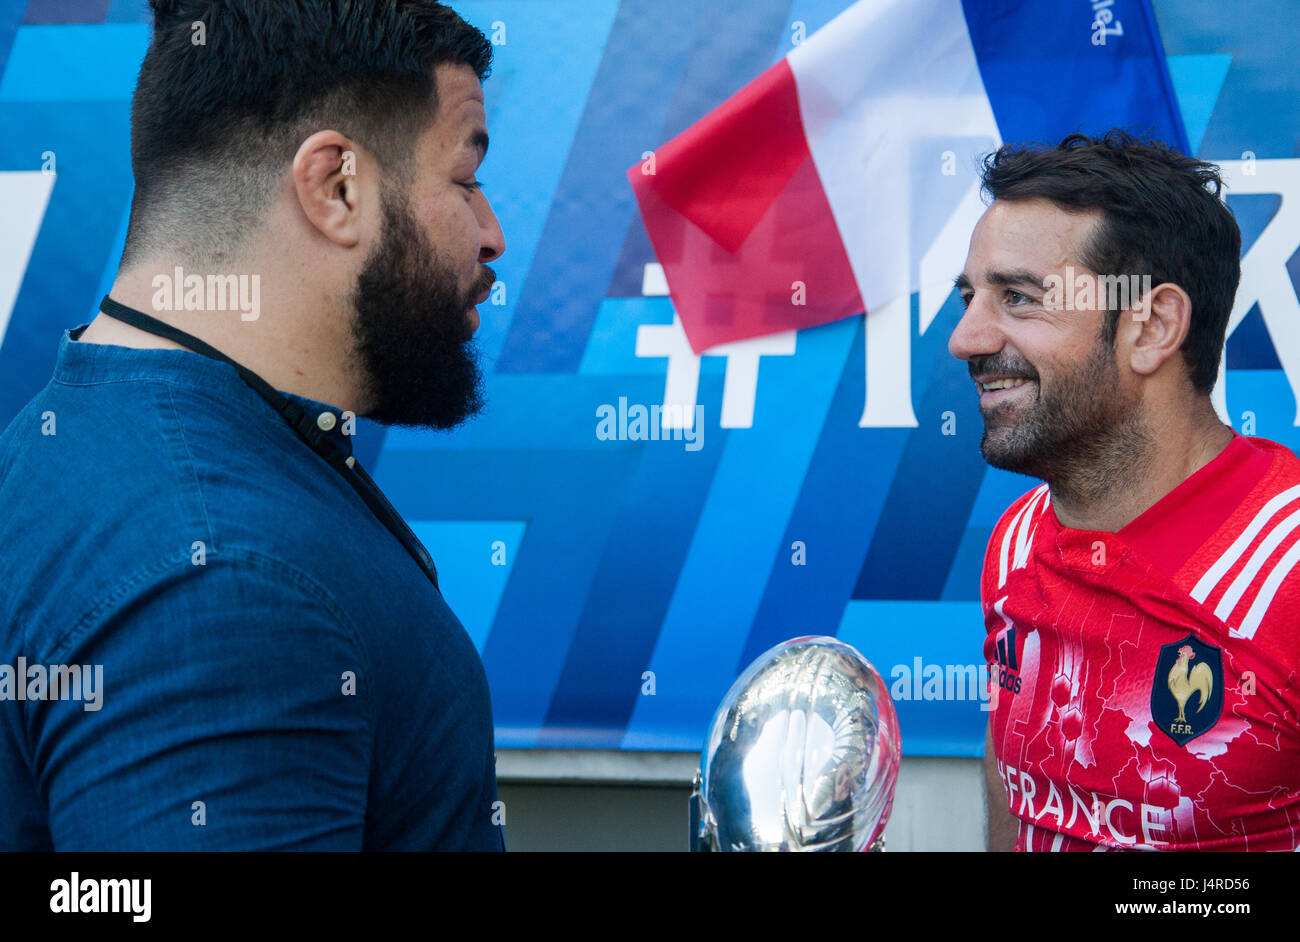 Paris, France. 14th May 2017. Rabah Slimani with the Challenge Cup speaks to French Sevens captian, Julien Candelon, as the Stade Francais Paris players parade the trophy around their home ground, Stade Jean Bouin. They beat Gloucester 25 - 17 in Murrayfield, Scotland to clinch the trophy. Credit: Elsie Kibue / Alamy Live News Stock Photo